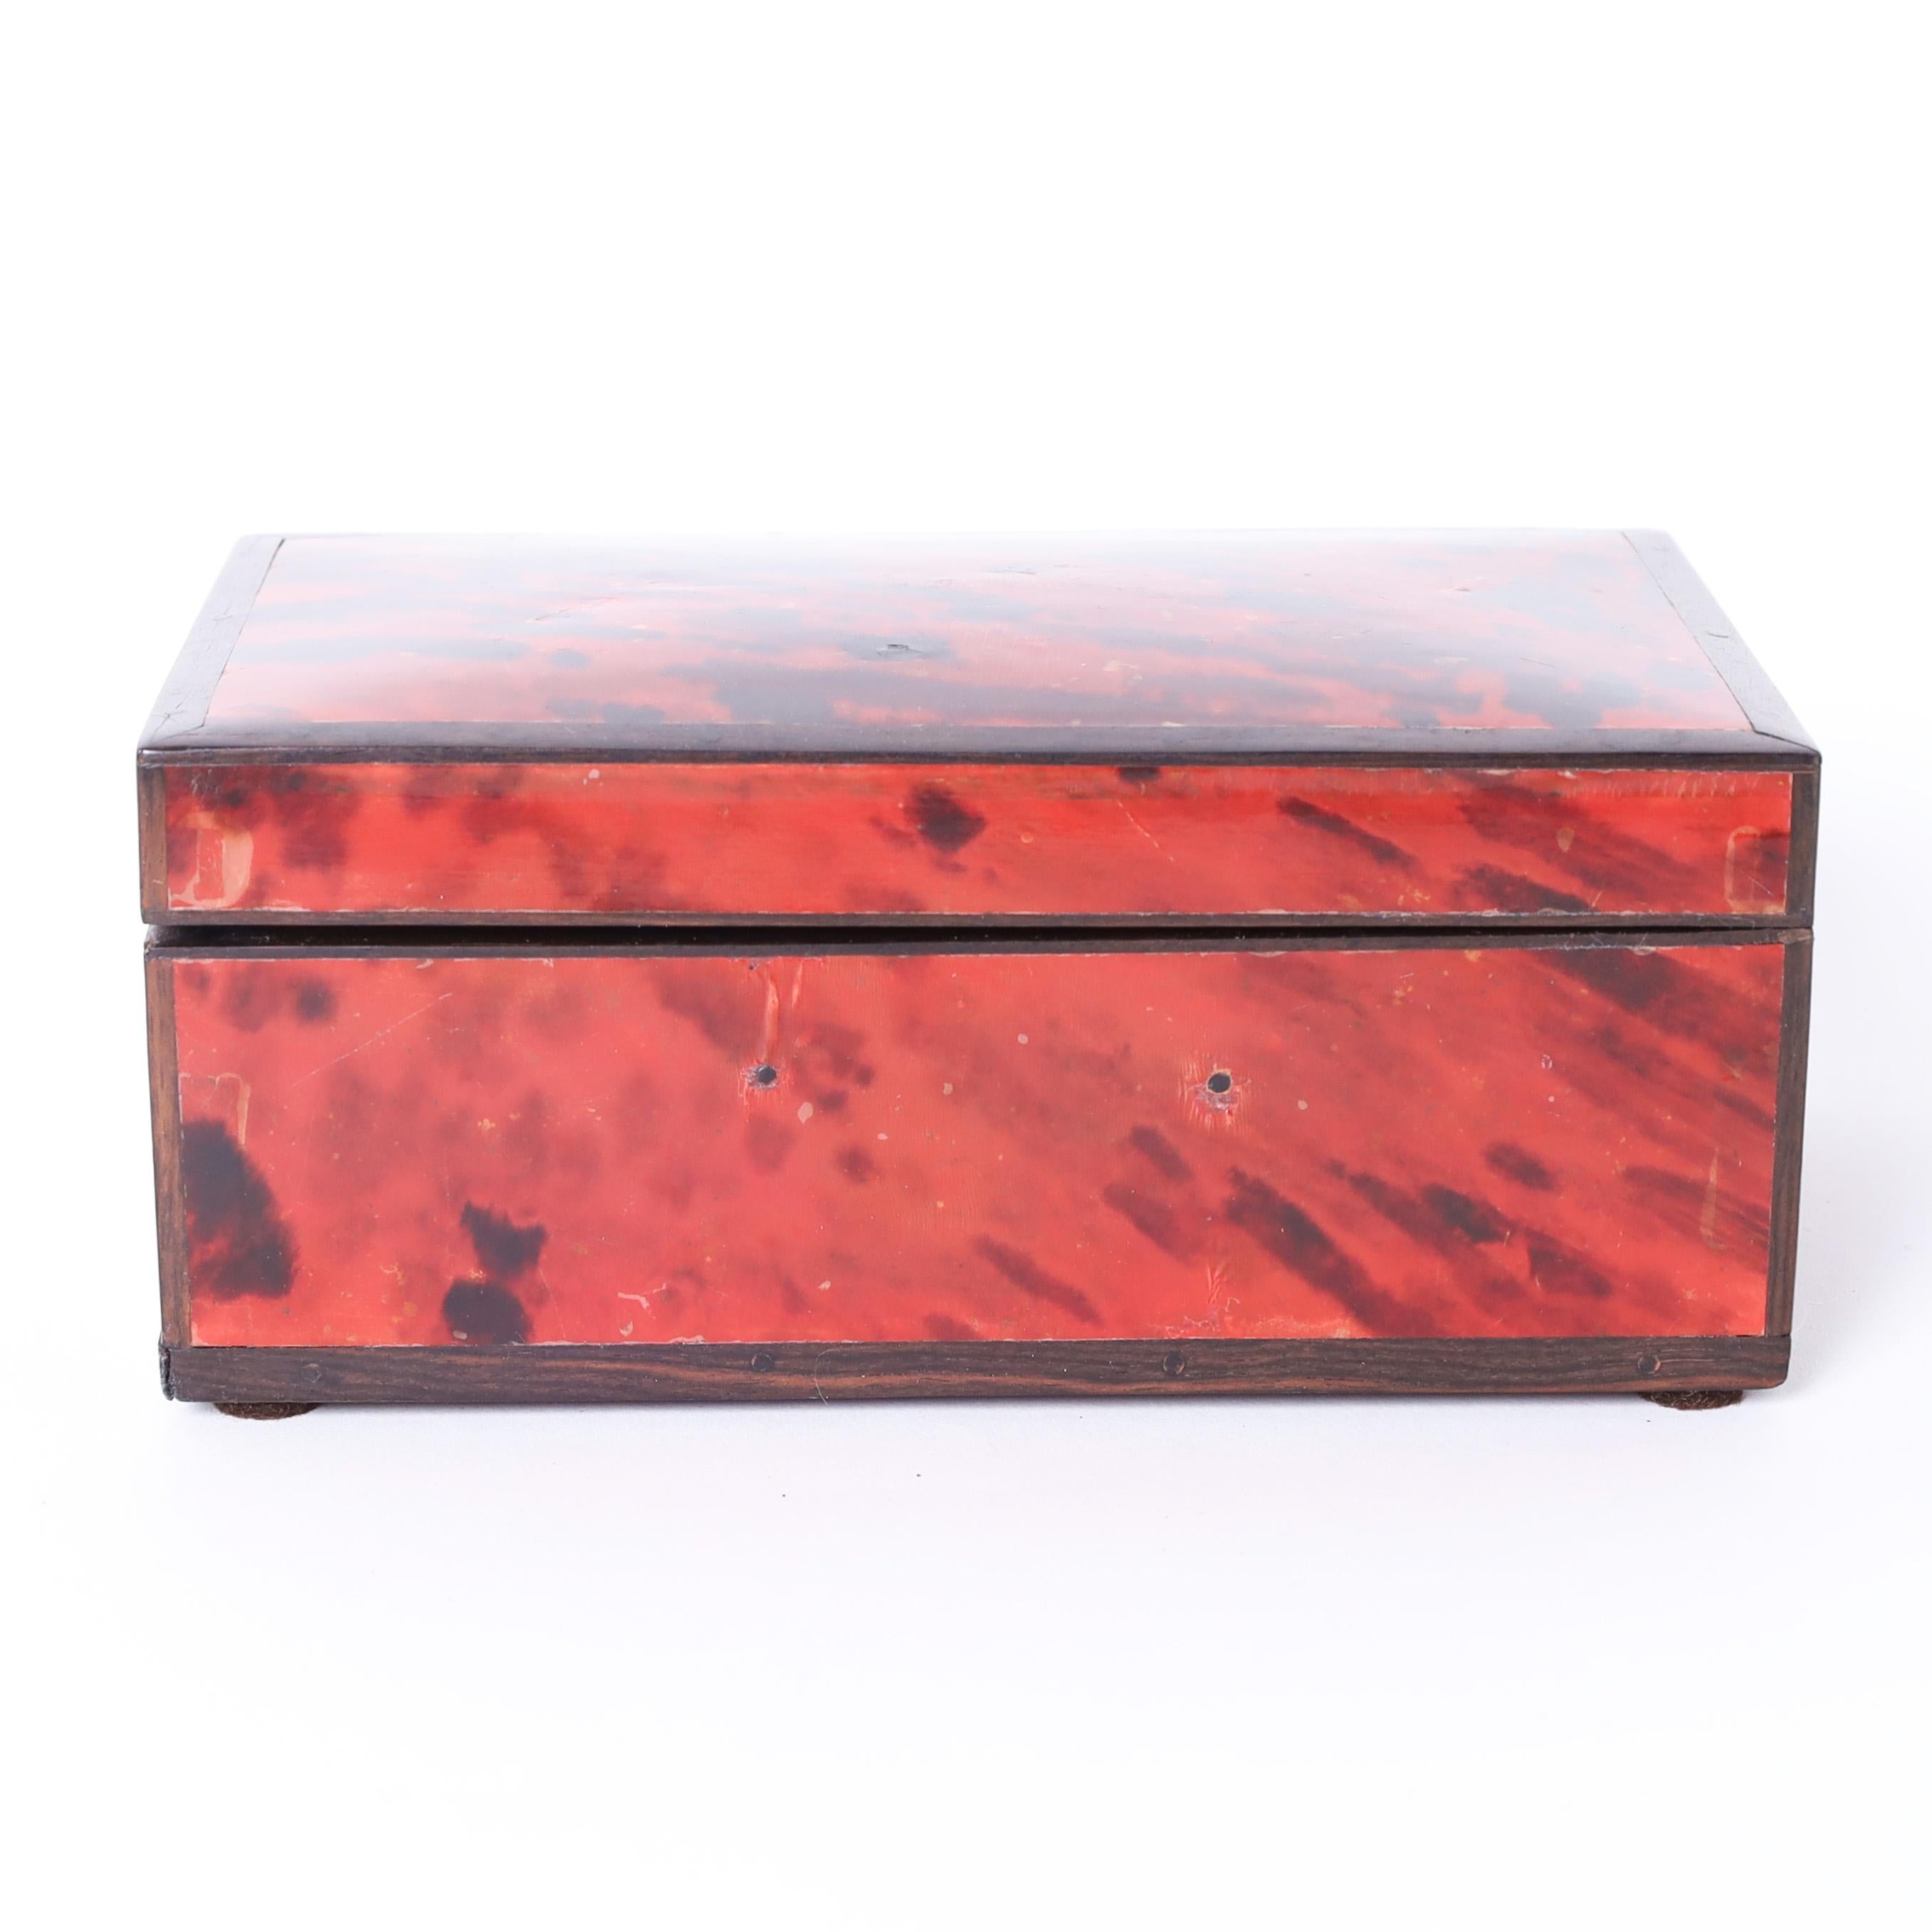 Inspired vintage Anglo Indian hinged box crafted in mahogany and clad in a faux tortoise laminate.